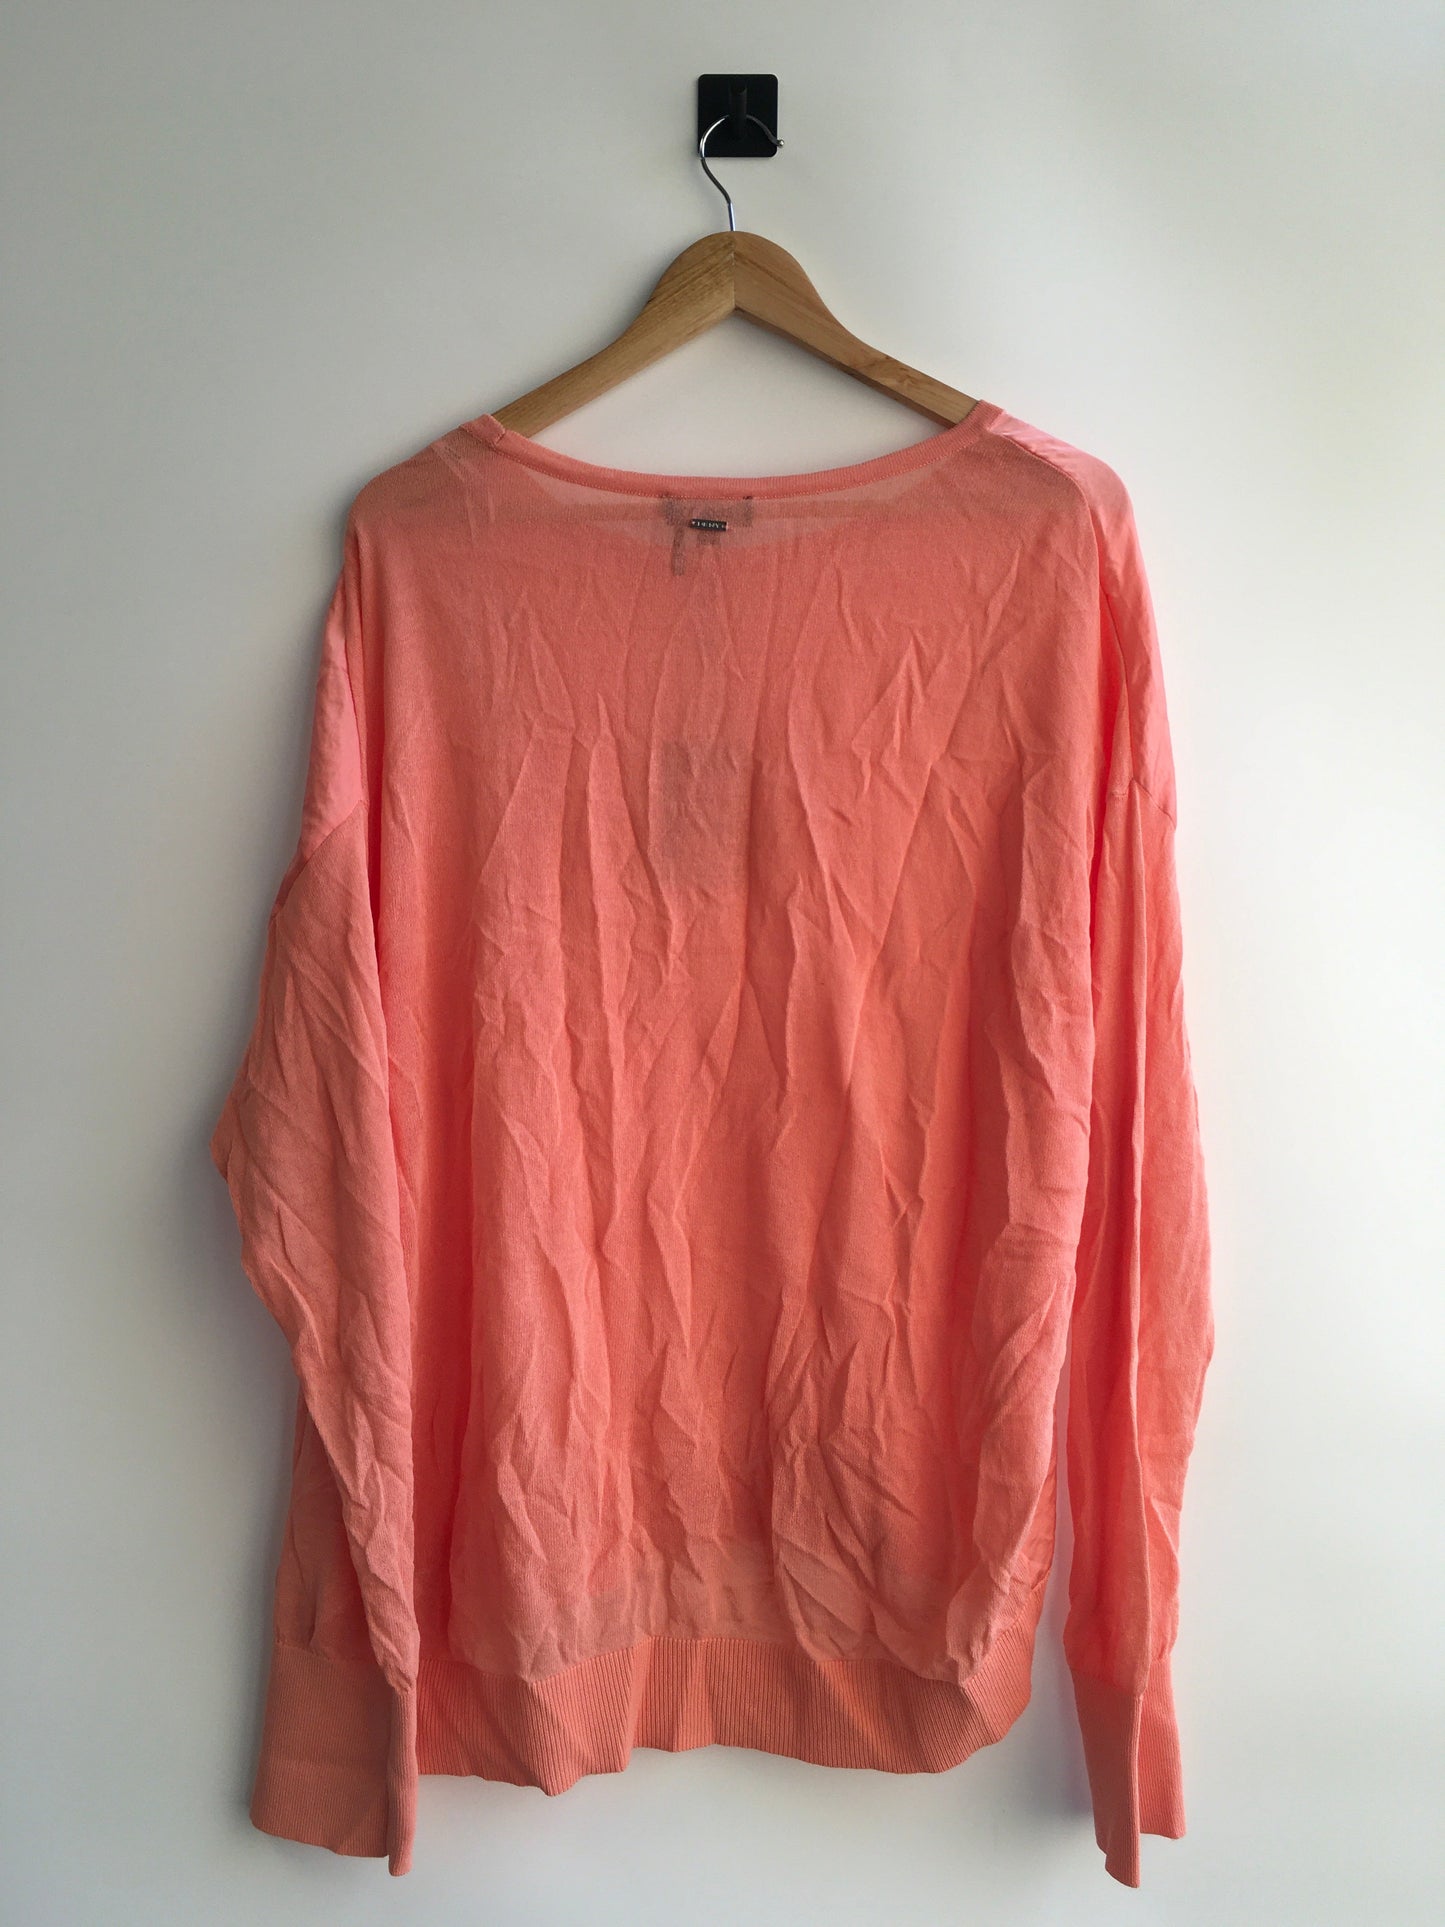 Top Long Sleeve By Dkny  Size: Xl